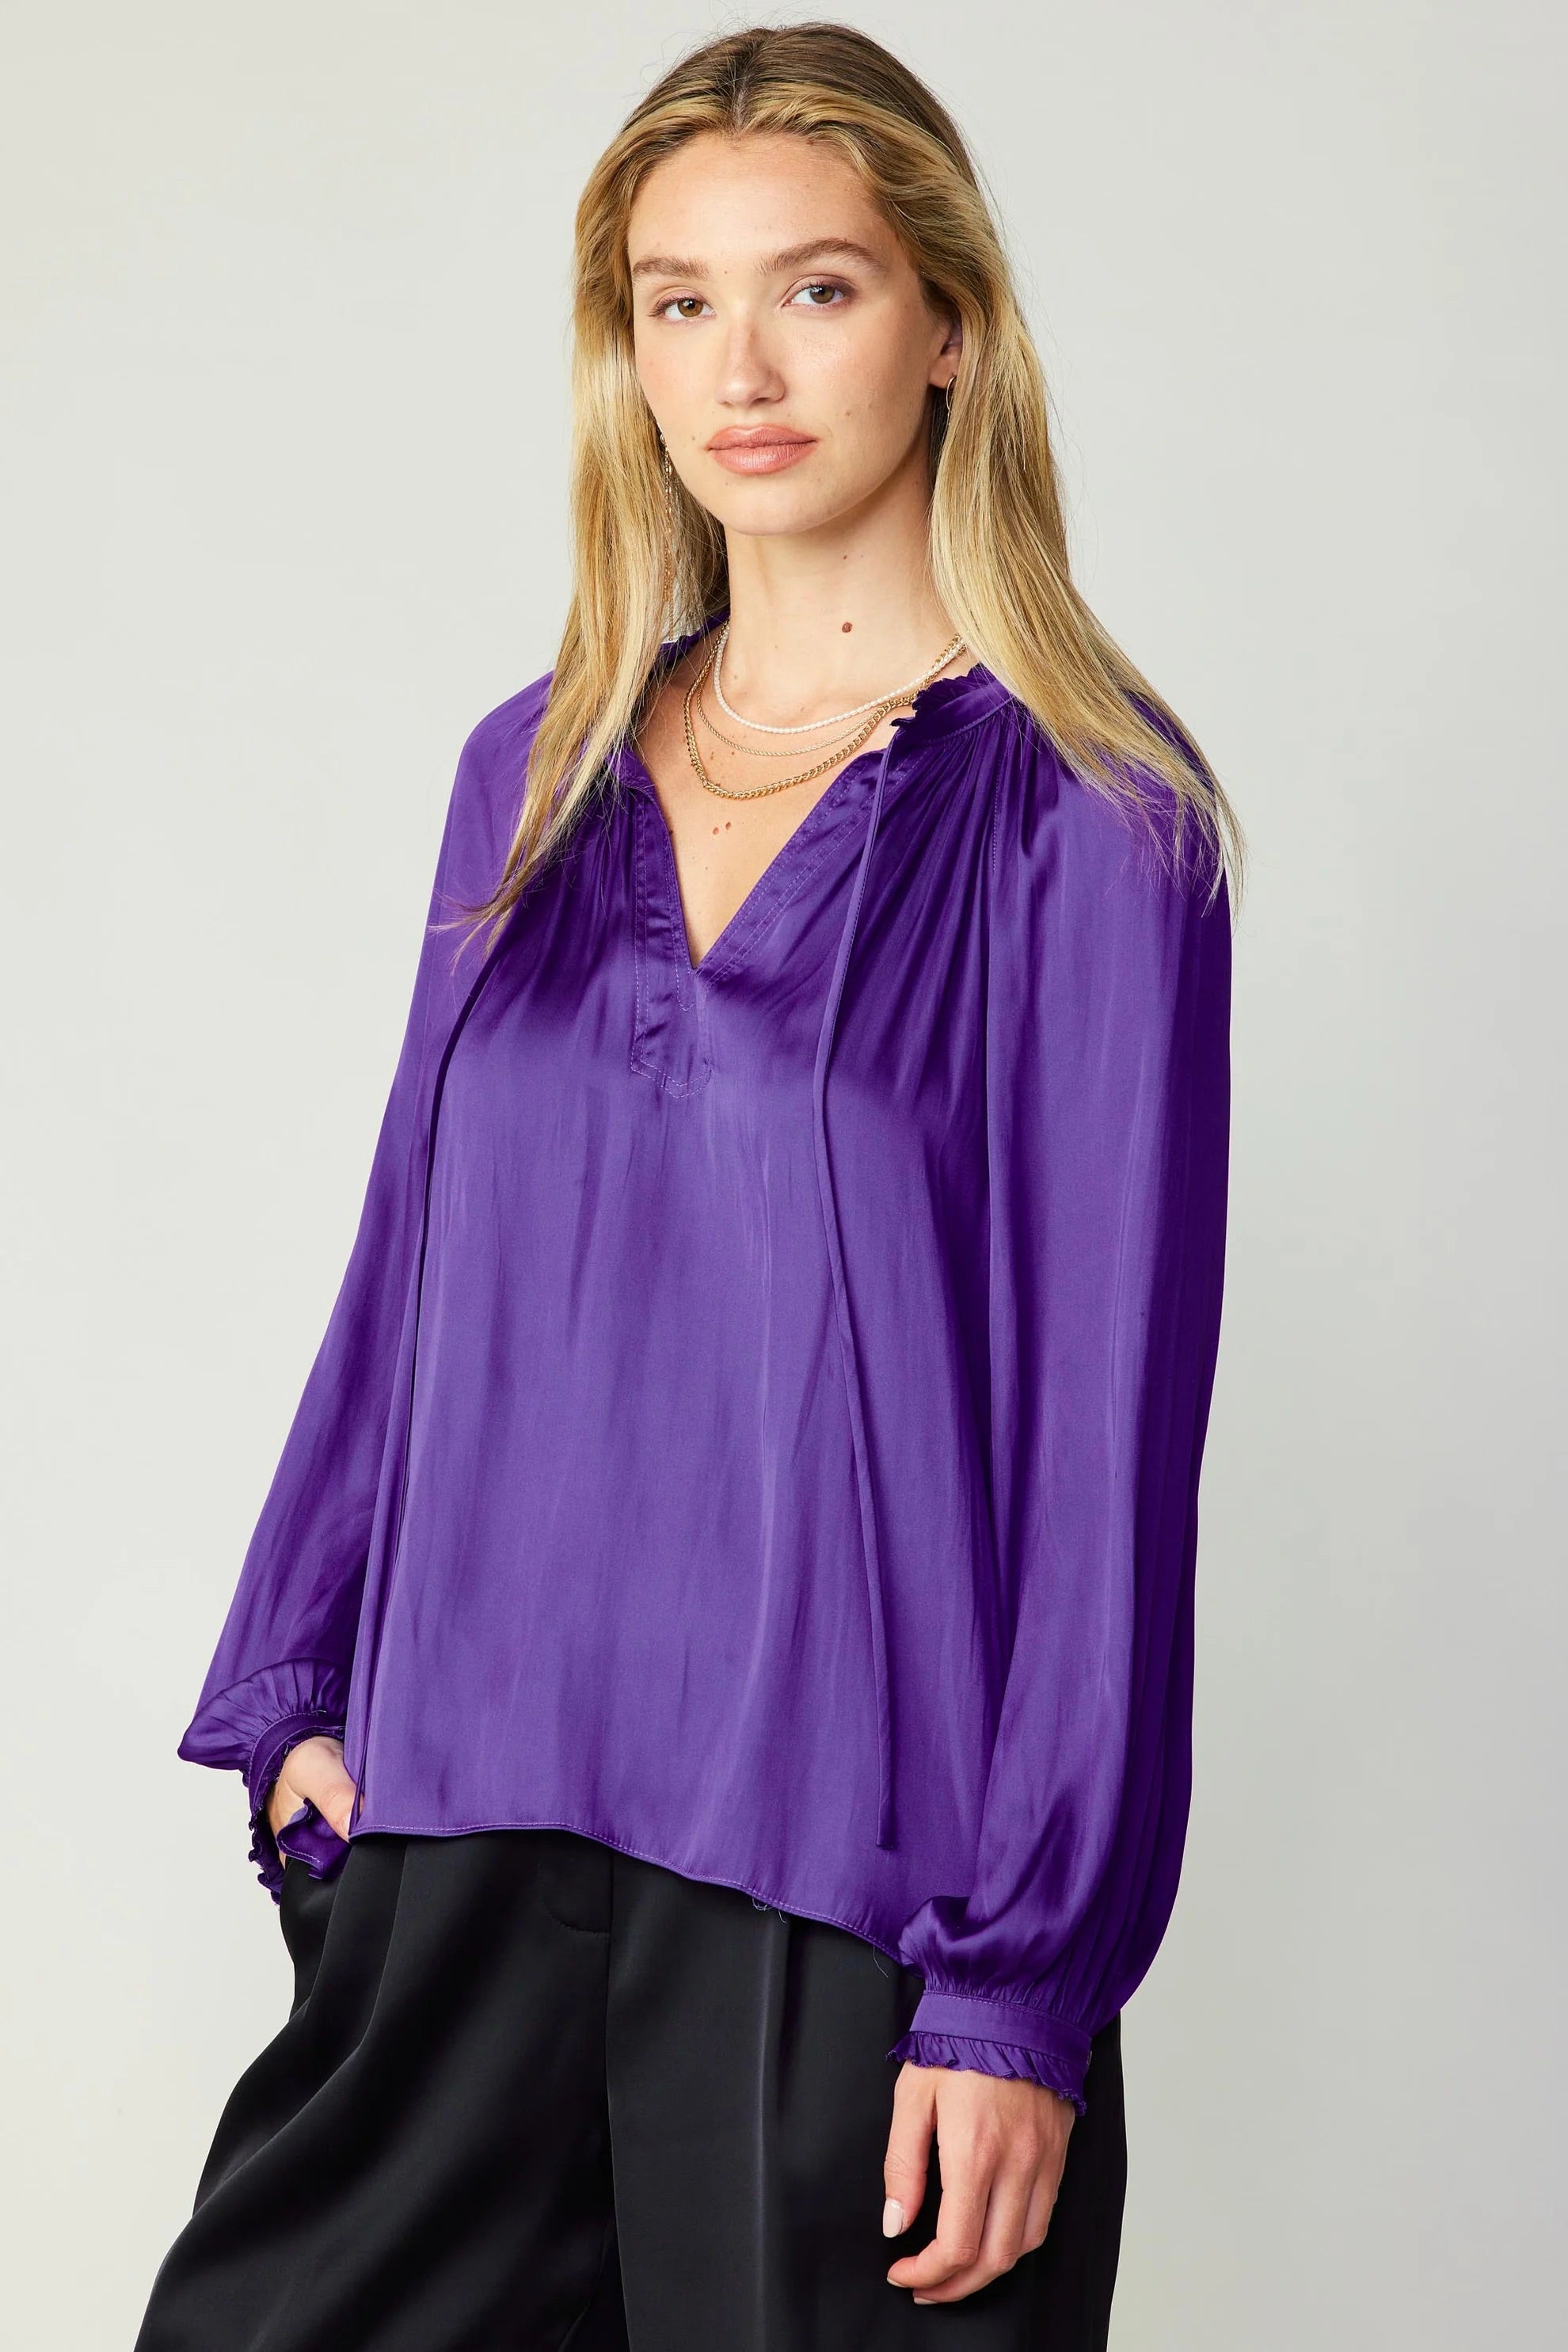 Ruffle Cuff Blouse in French Violet